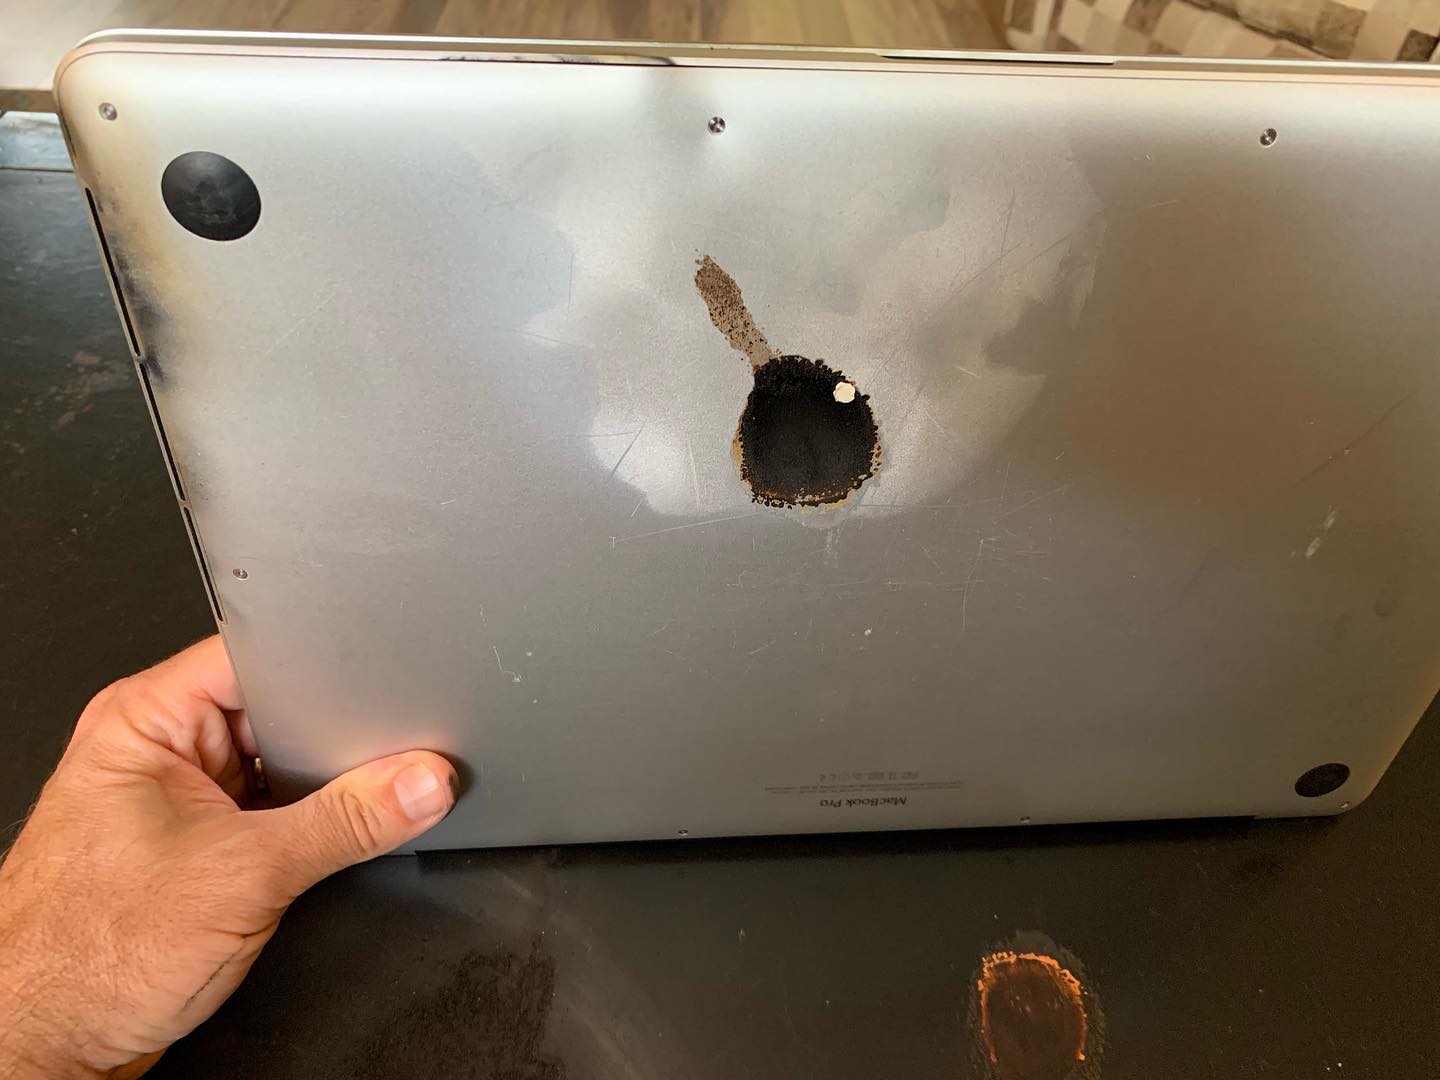 Damage done to a 2015 15-inch MacBook Pro